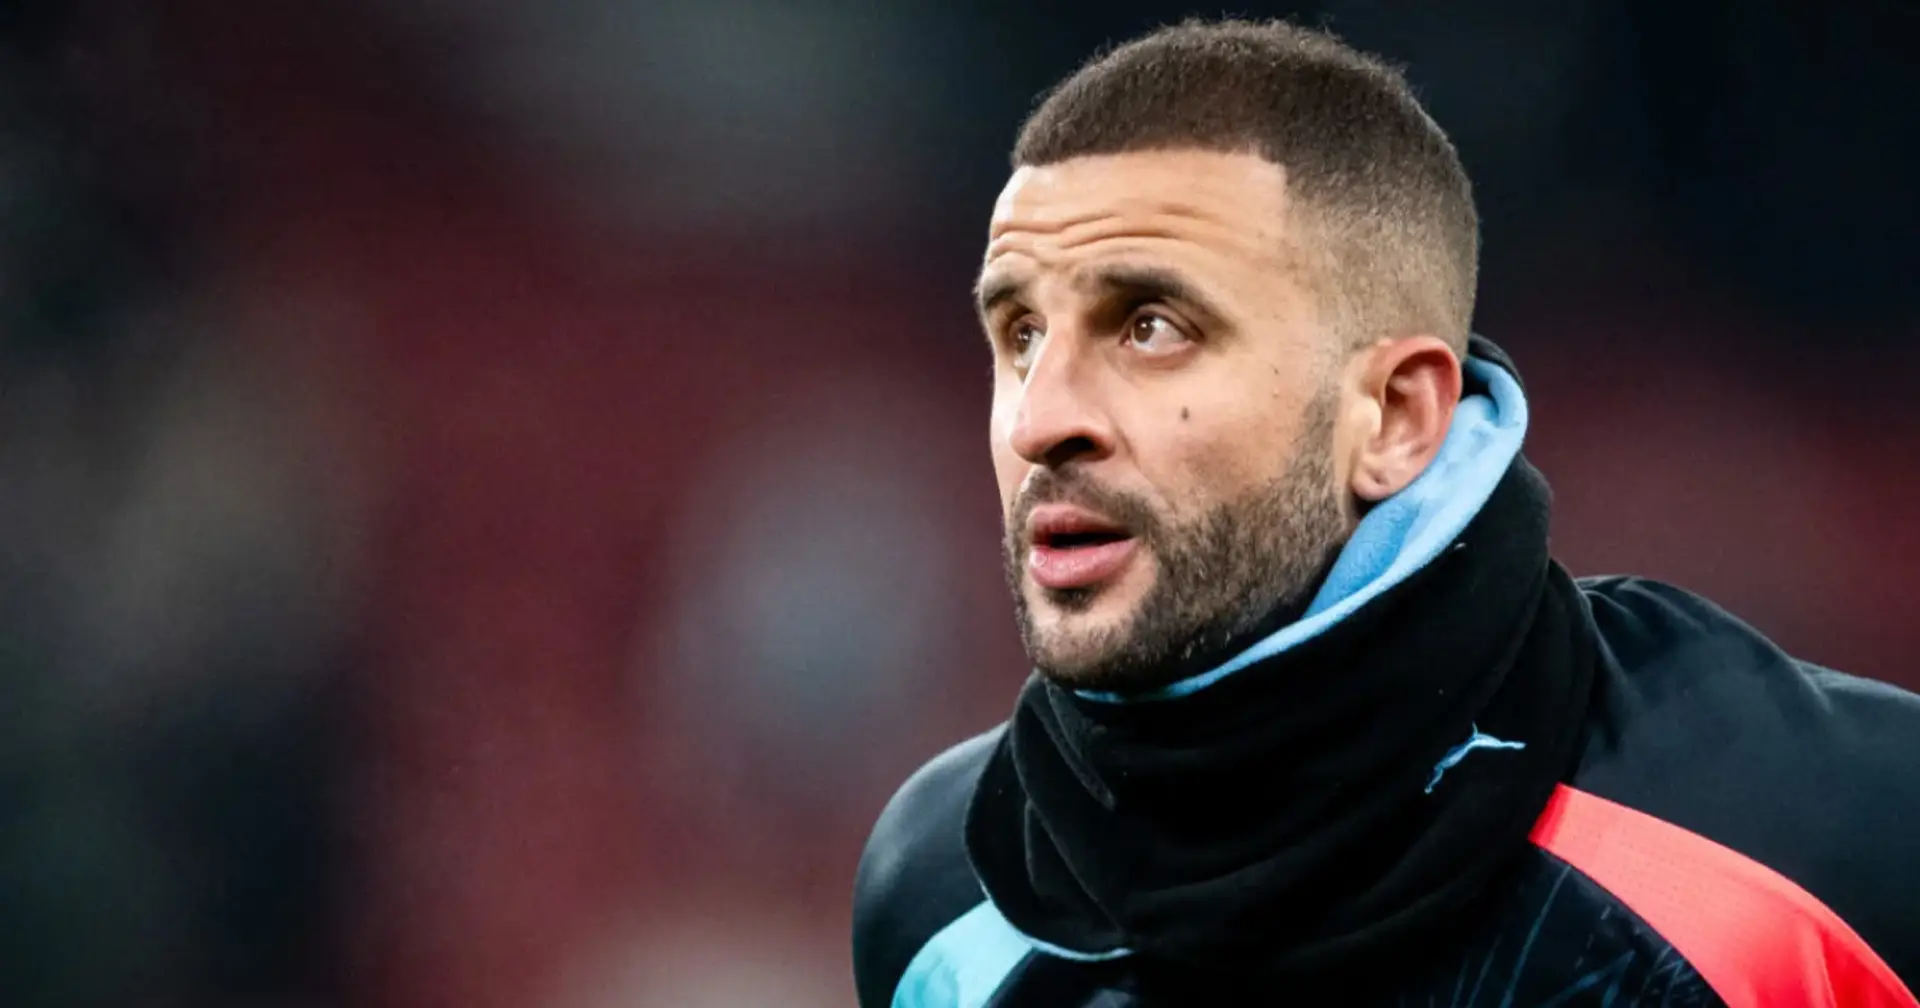 'I will see the training': Pep Guardiola on Kyle Walker's form